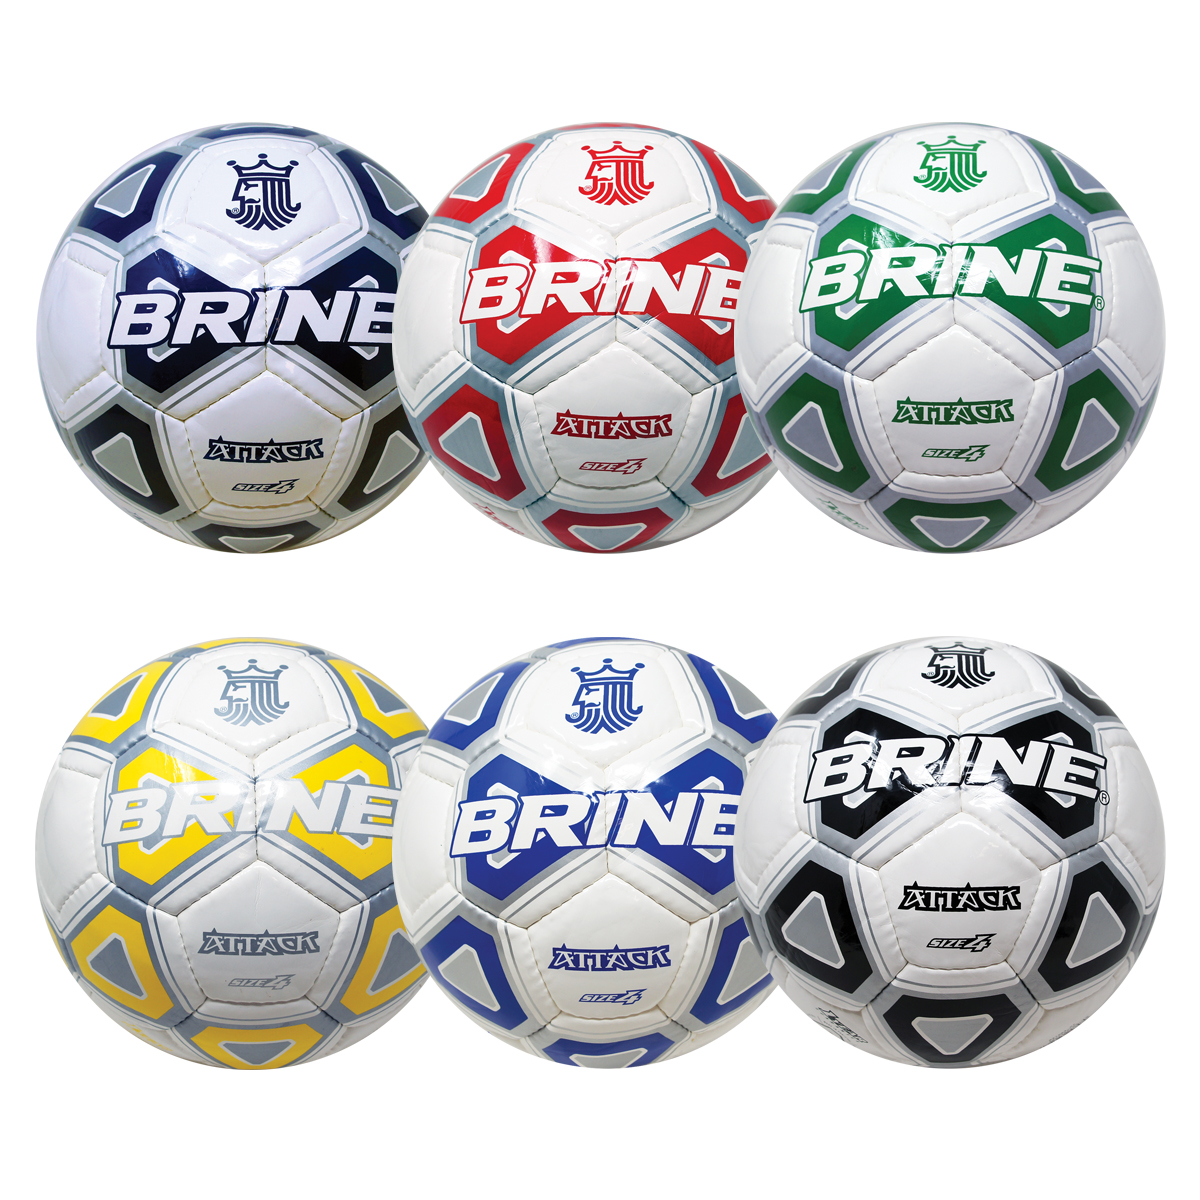 Brine Attack Syn. Leather Soccer Balls-Size 4